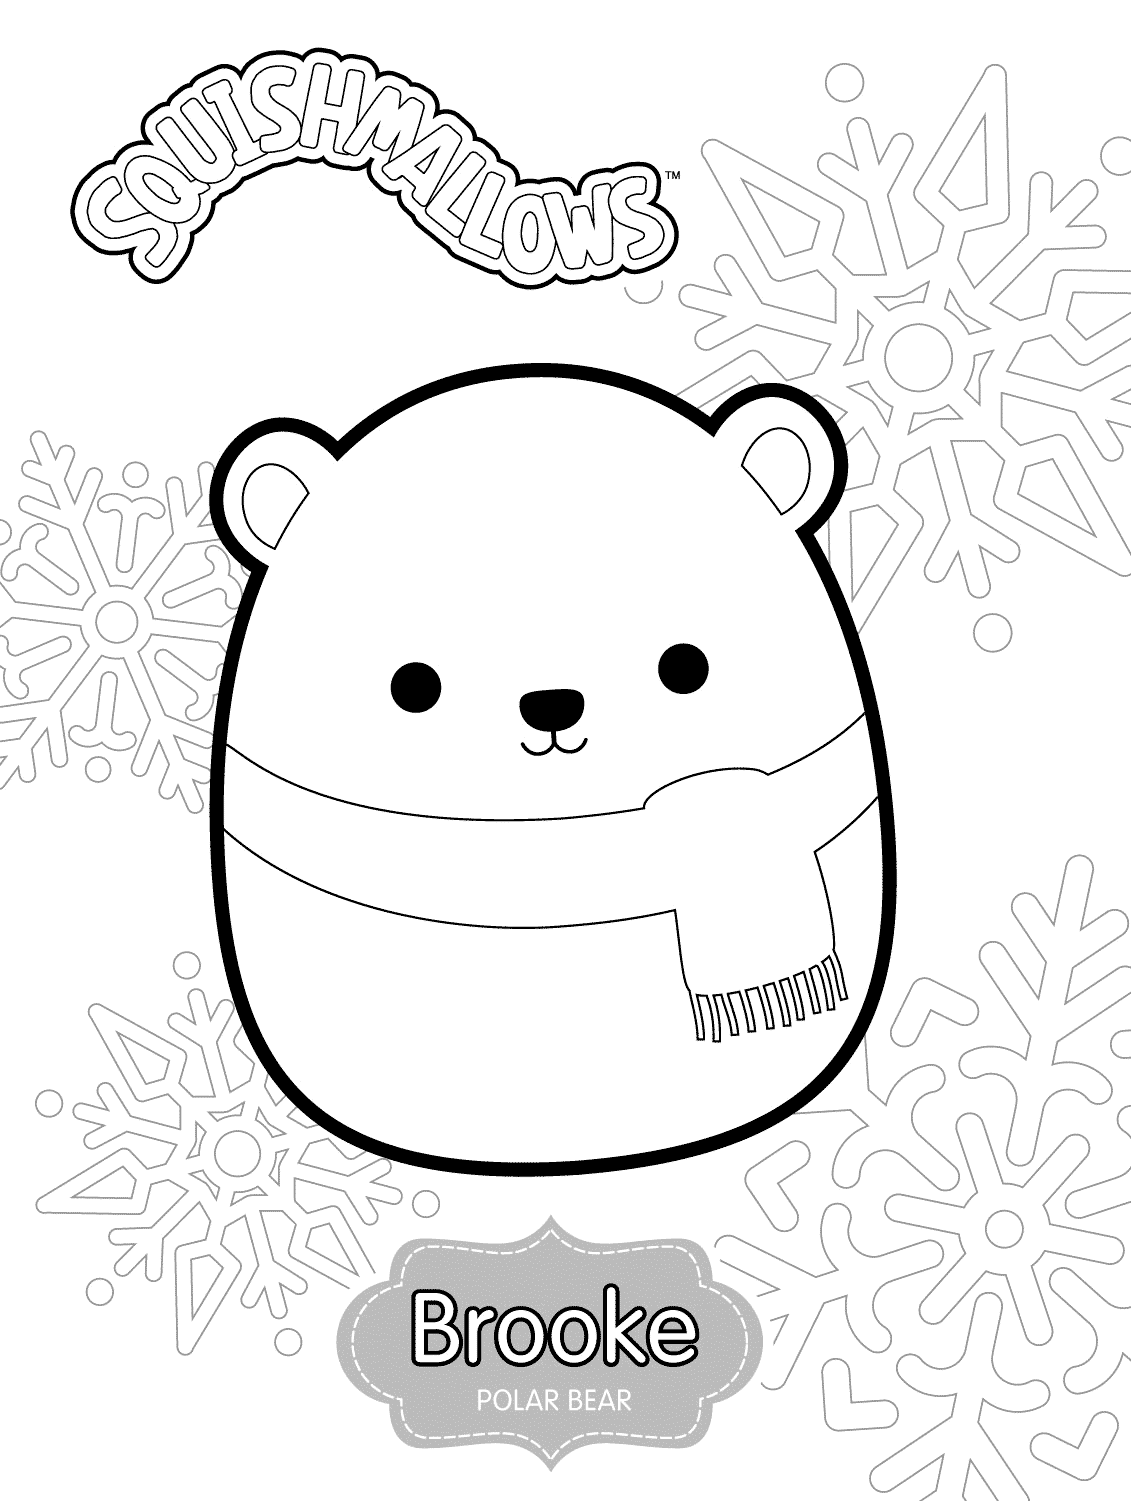 Brooke Polar Bear Squishmallows Coloring Page